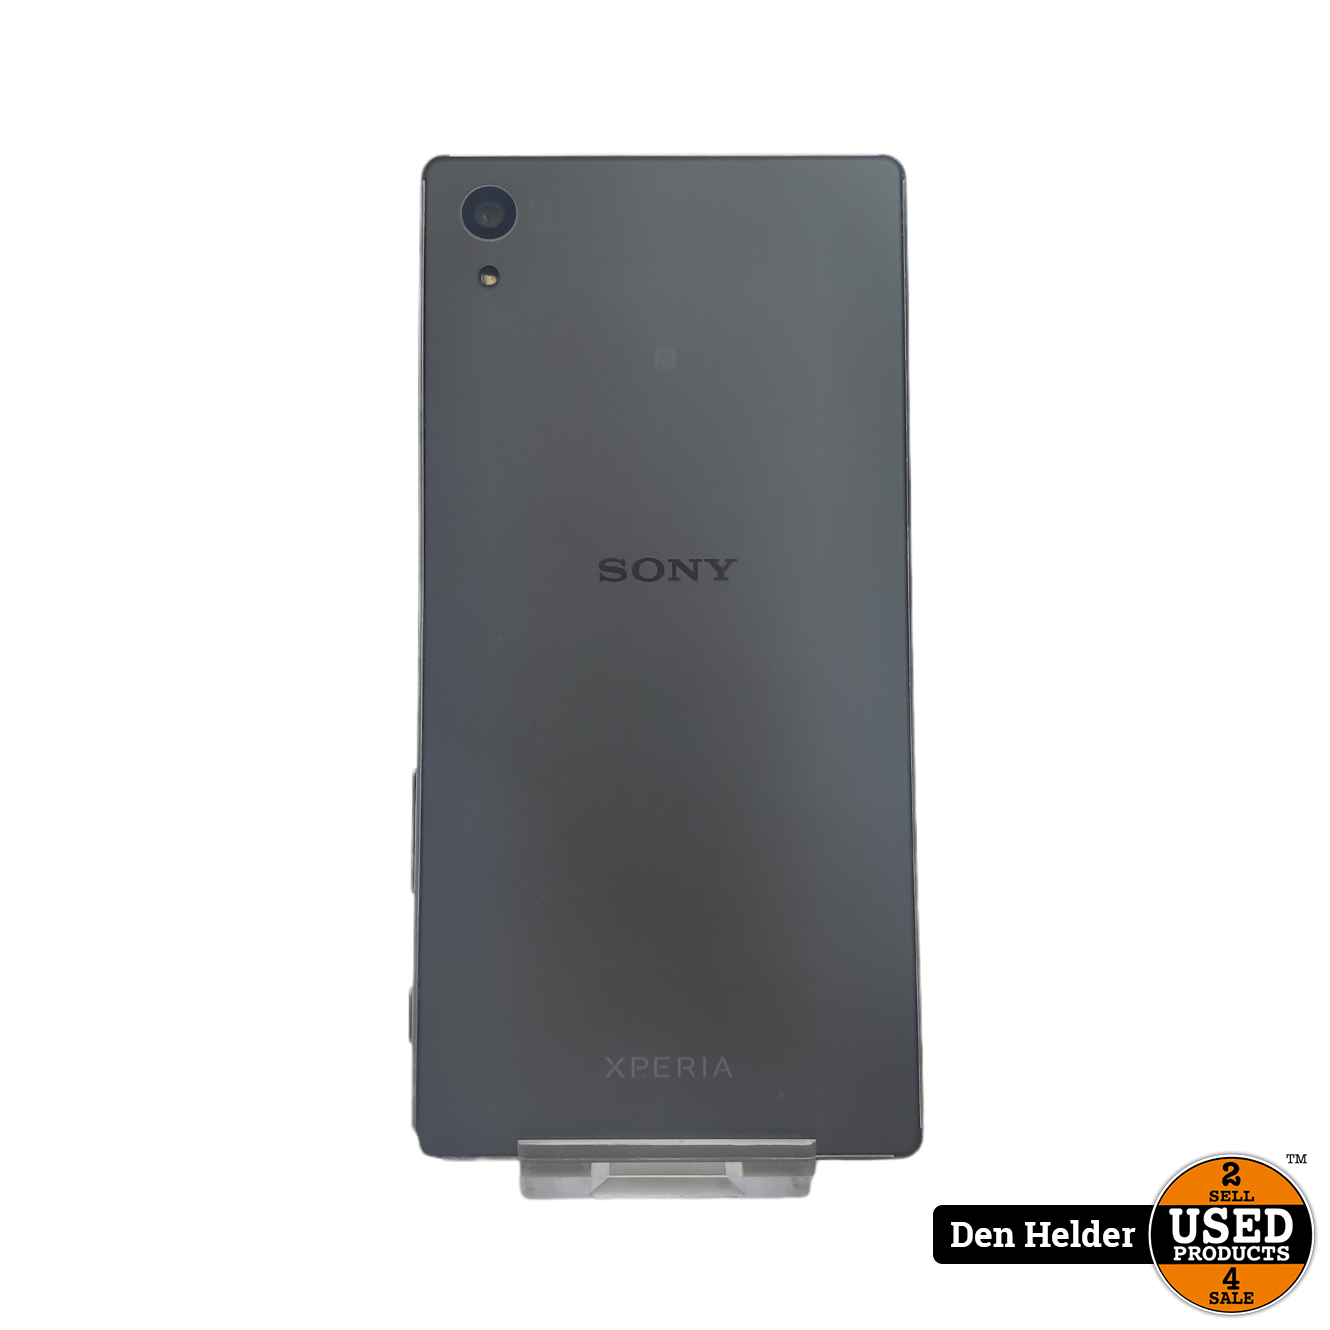 zondag zak Weinig Sony Xperia Z5 32GB Android 7 - In Goede Staat - Used Products Den Helder